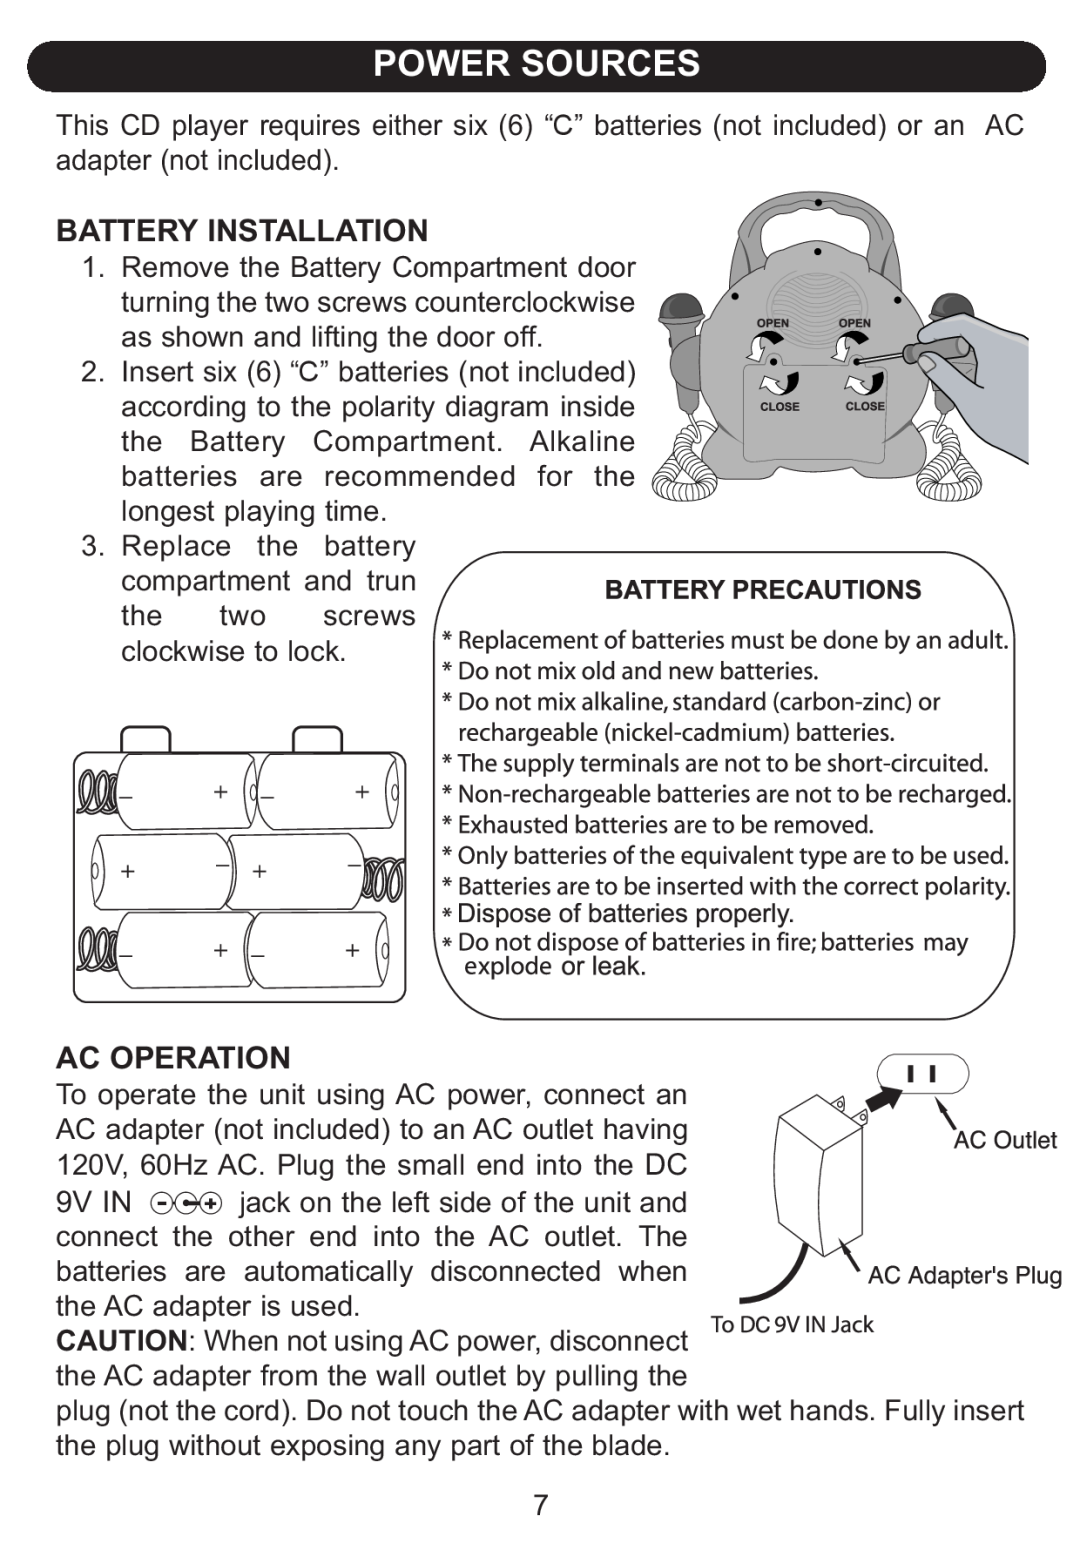 Emerson BAR504 owner manual Battery Installation, Ac Operation 